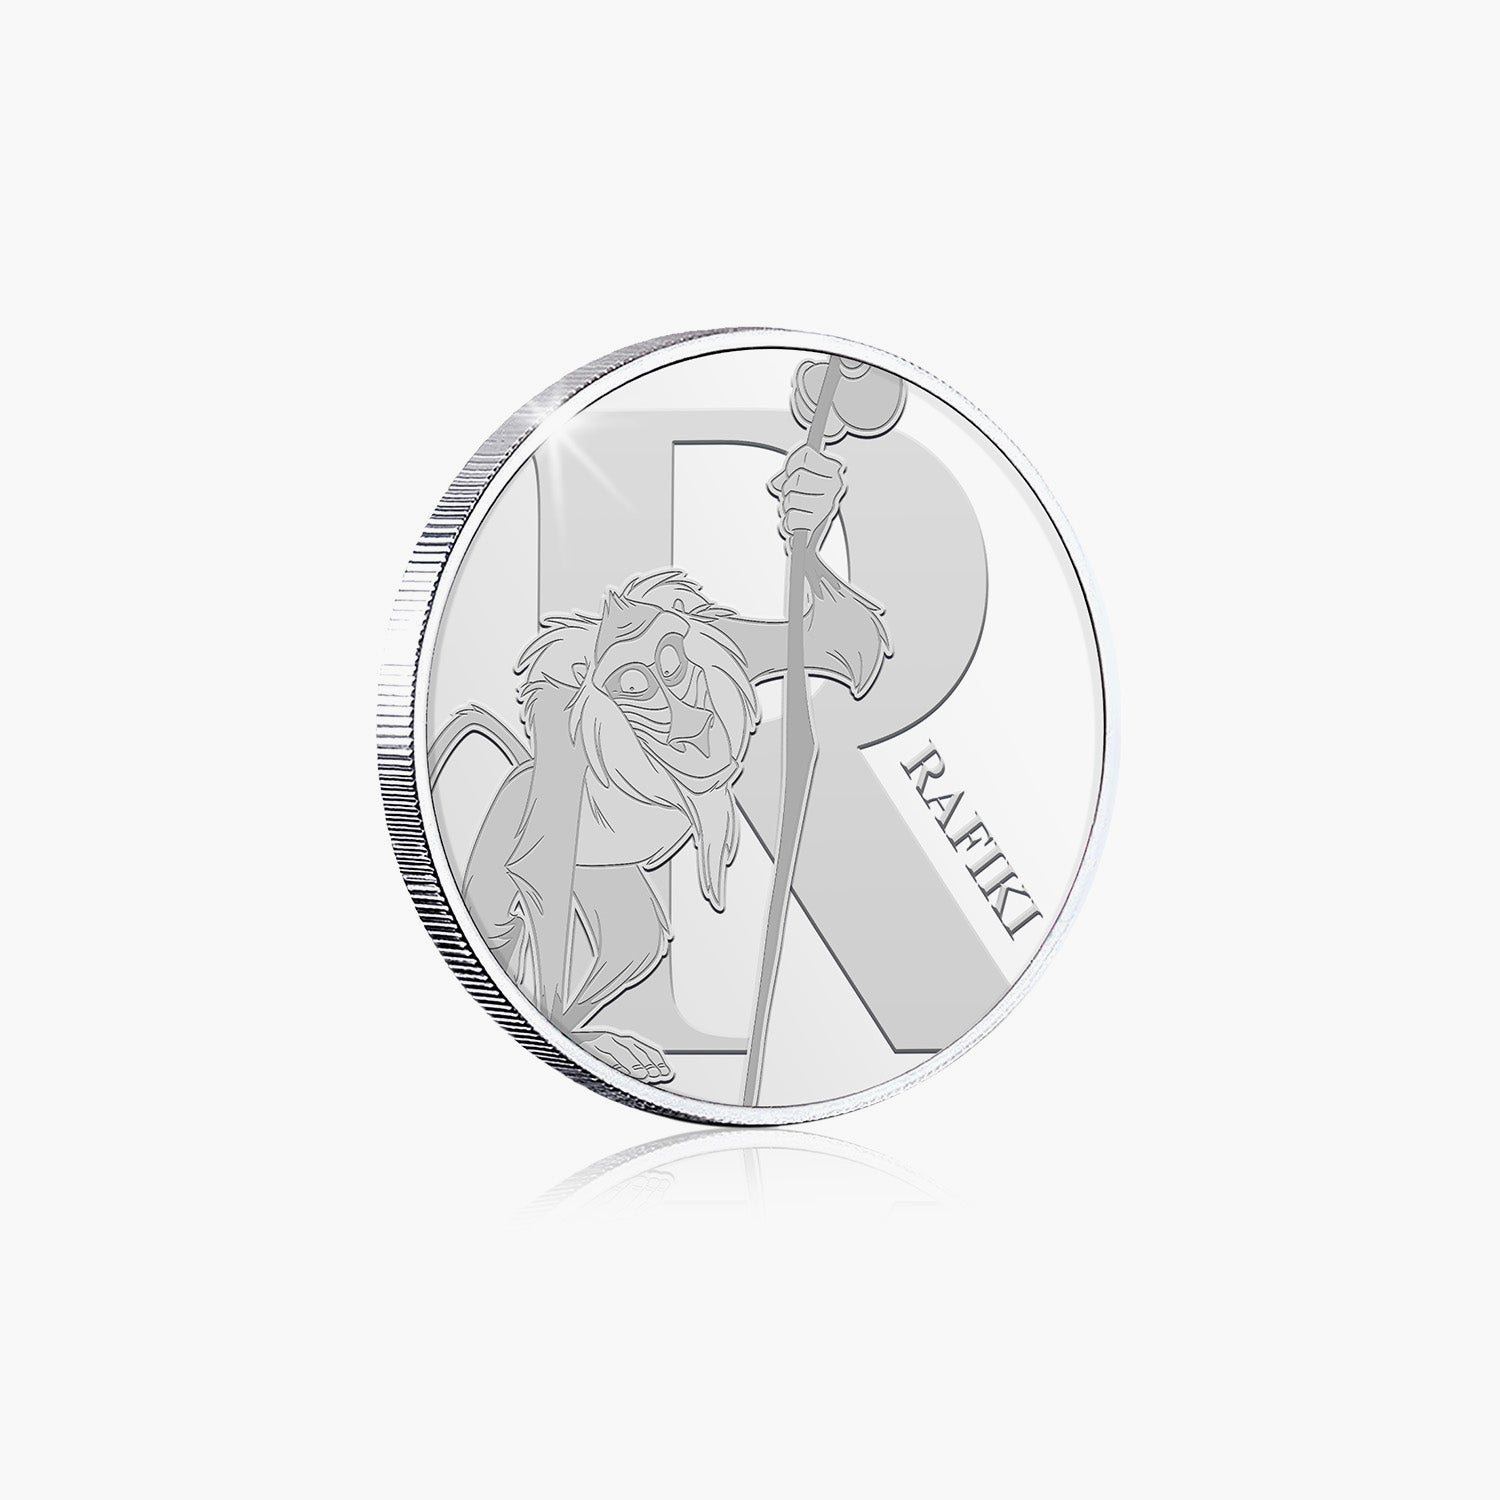 R Is For Rafiki Silver-Plated Commemorative